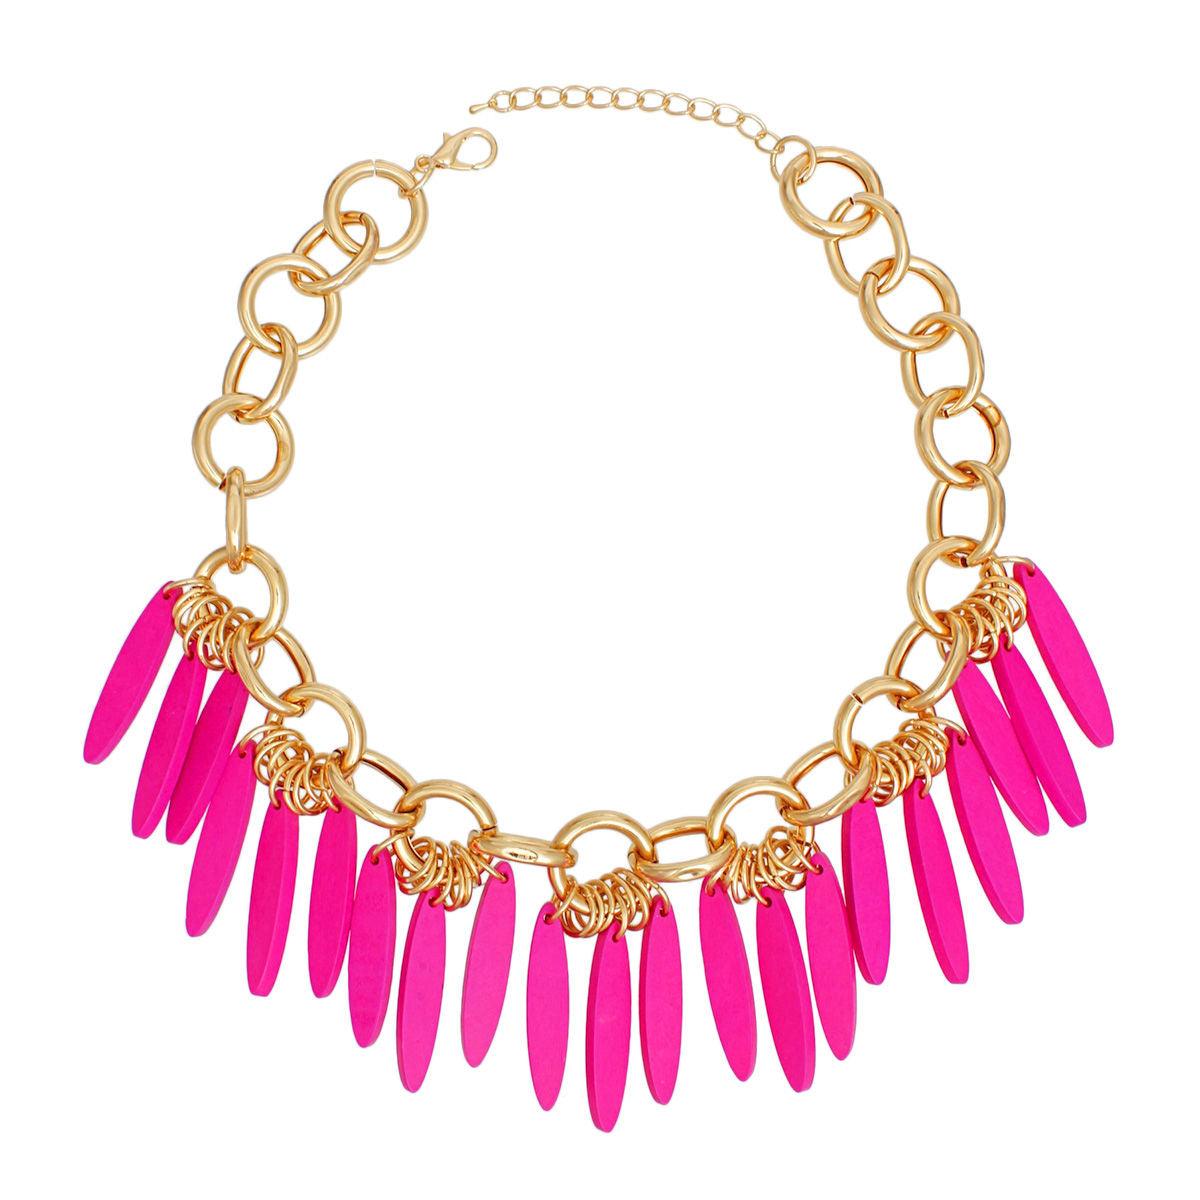 Gold Link Chain Purple-fuchsia Drops Detail Statement Necklace - Fashion Jewelry to Shop Now!